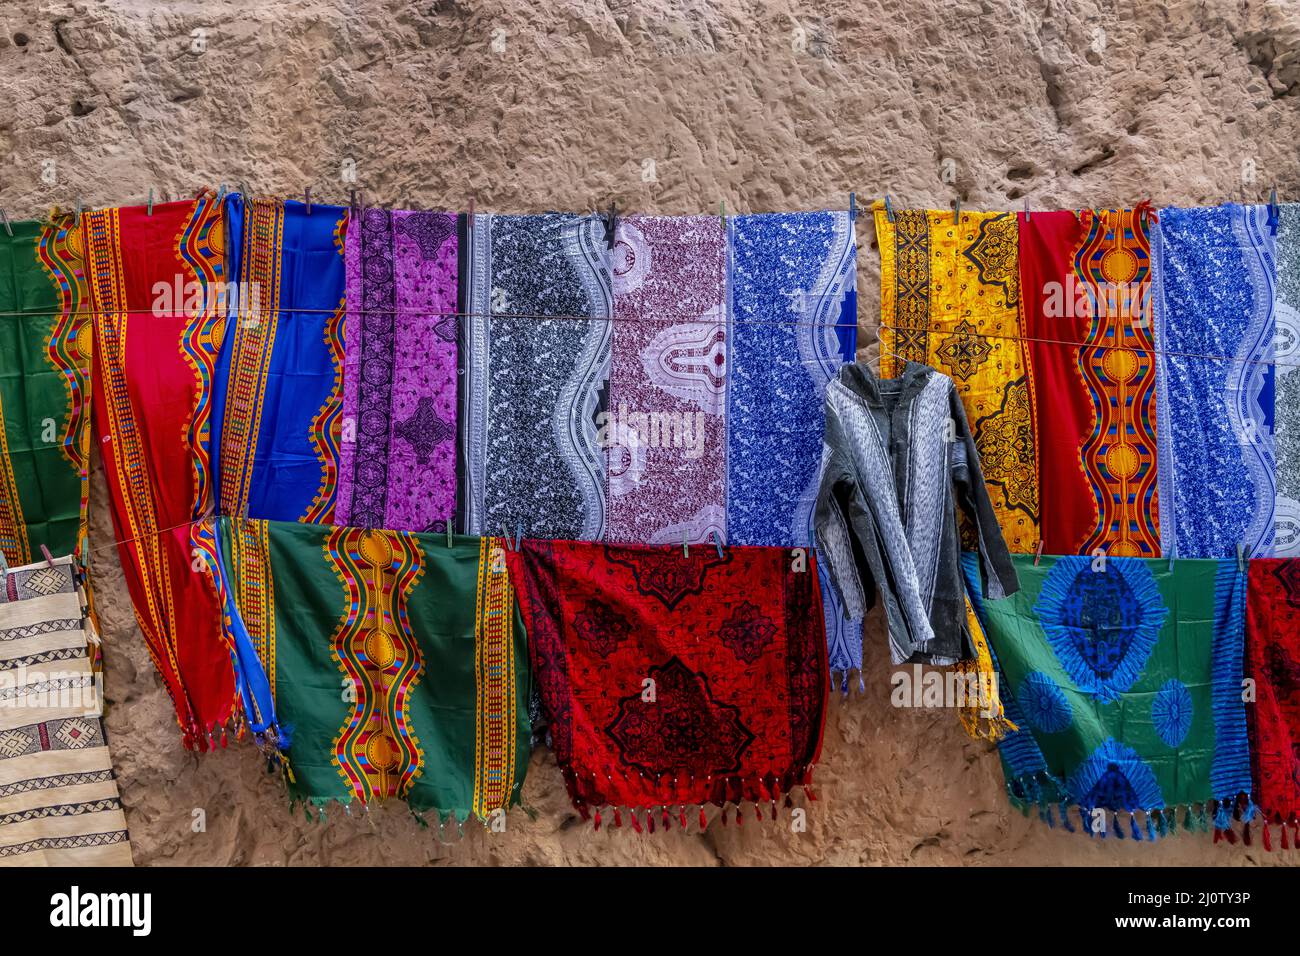 Colorful Clothing And Materials Are Sold In The Open Market In The City Of Fes, Morocco, Africa Stock Photo